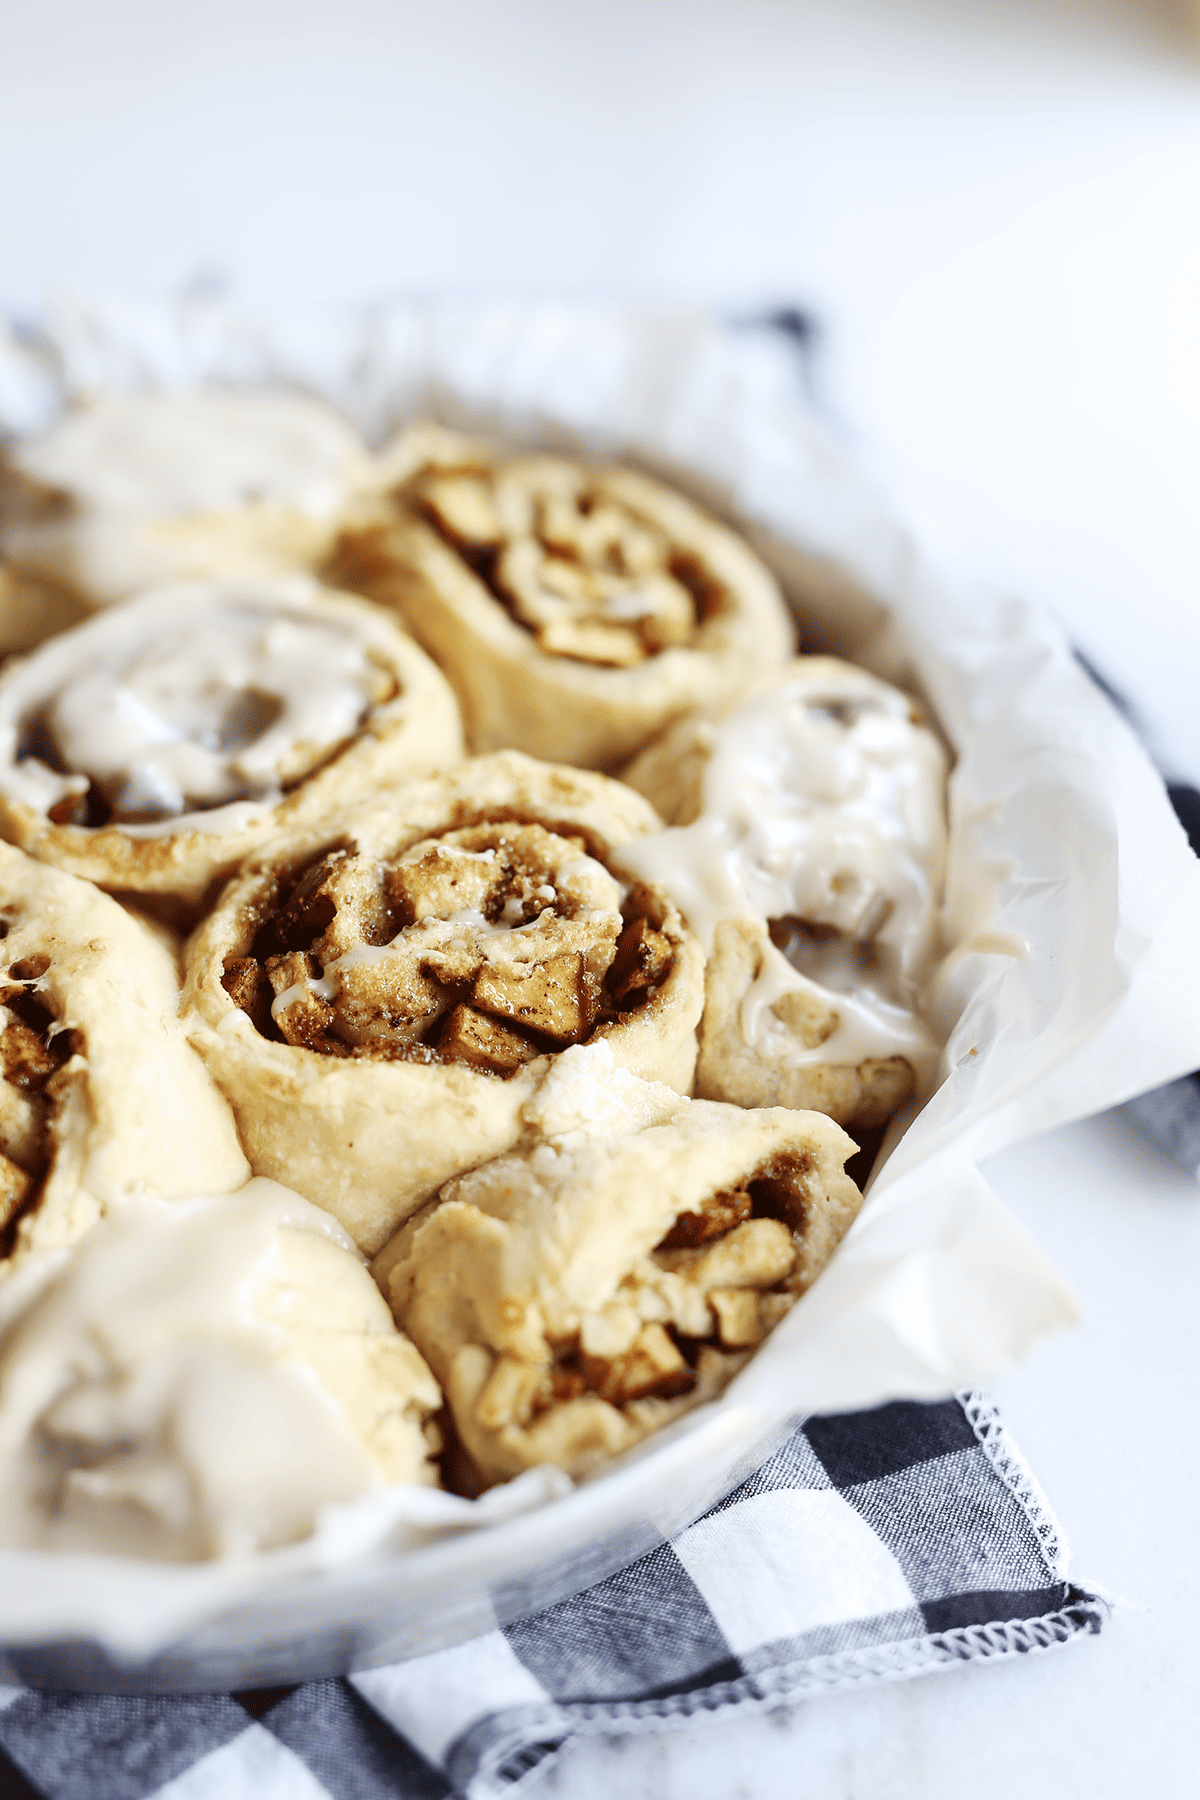 These easy Apple Spice Rolls taste just like a homemade apple pie wrapped in a super soft and perfectly doughy roll. Vegan and super yum!